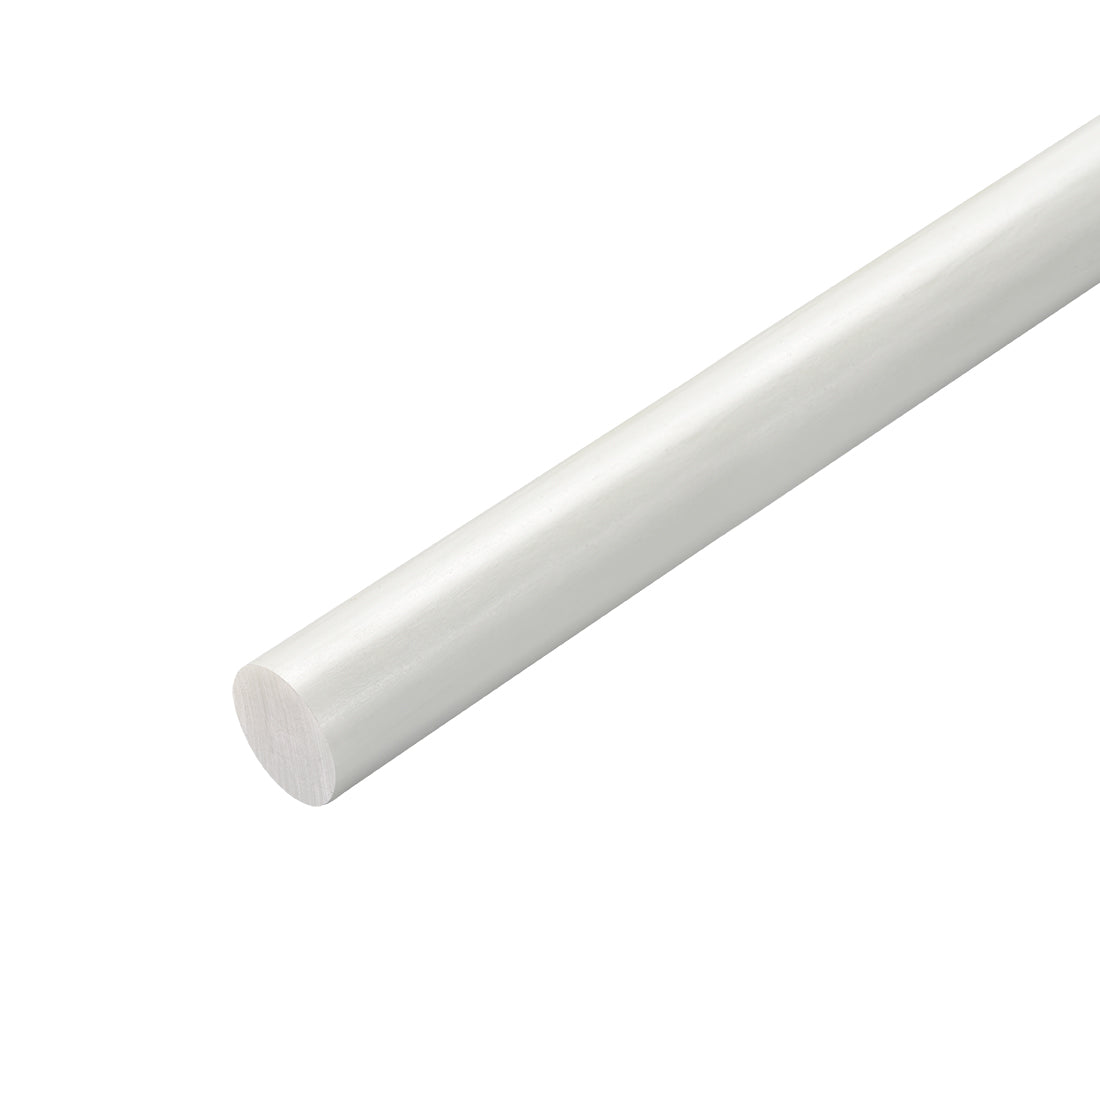 uxcell Uxcell FRP Fiberglass Round Rod,9mm Dia 50cm Long,White Engineering Round Bar Rod